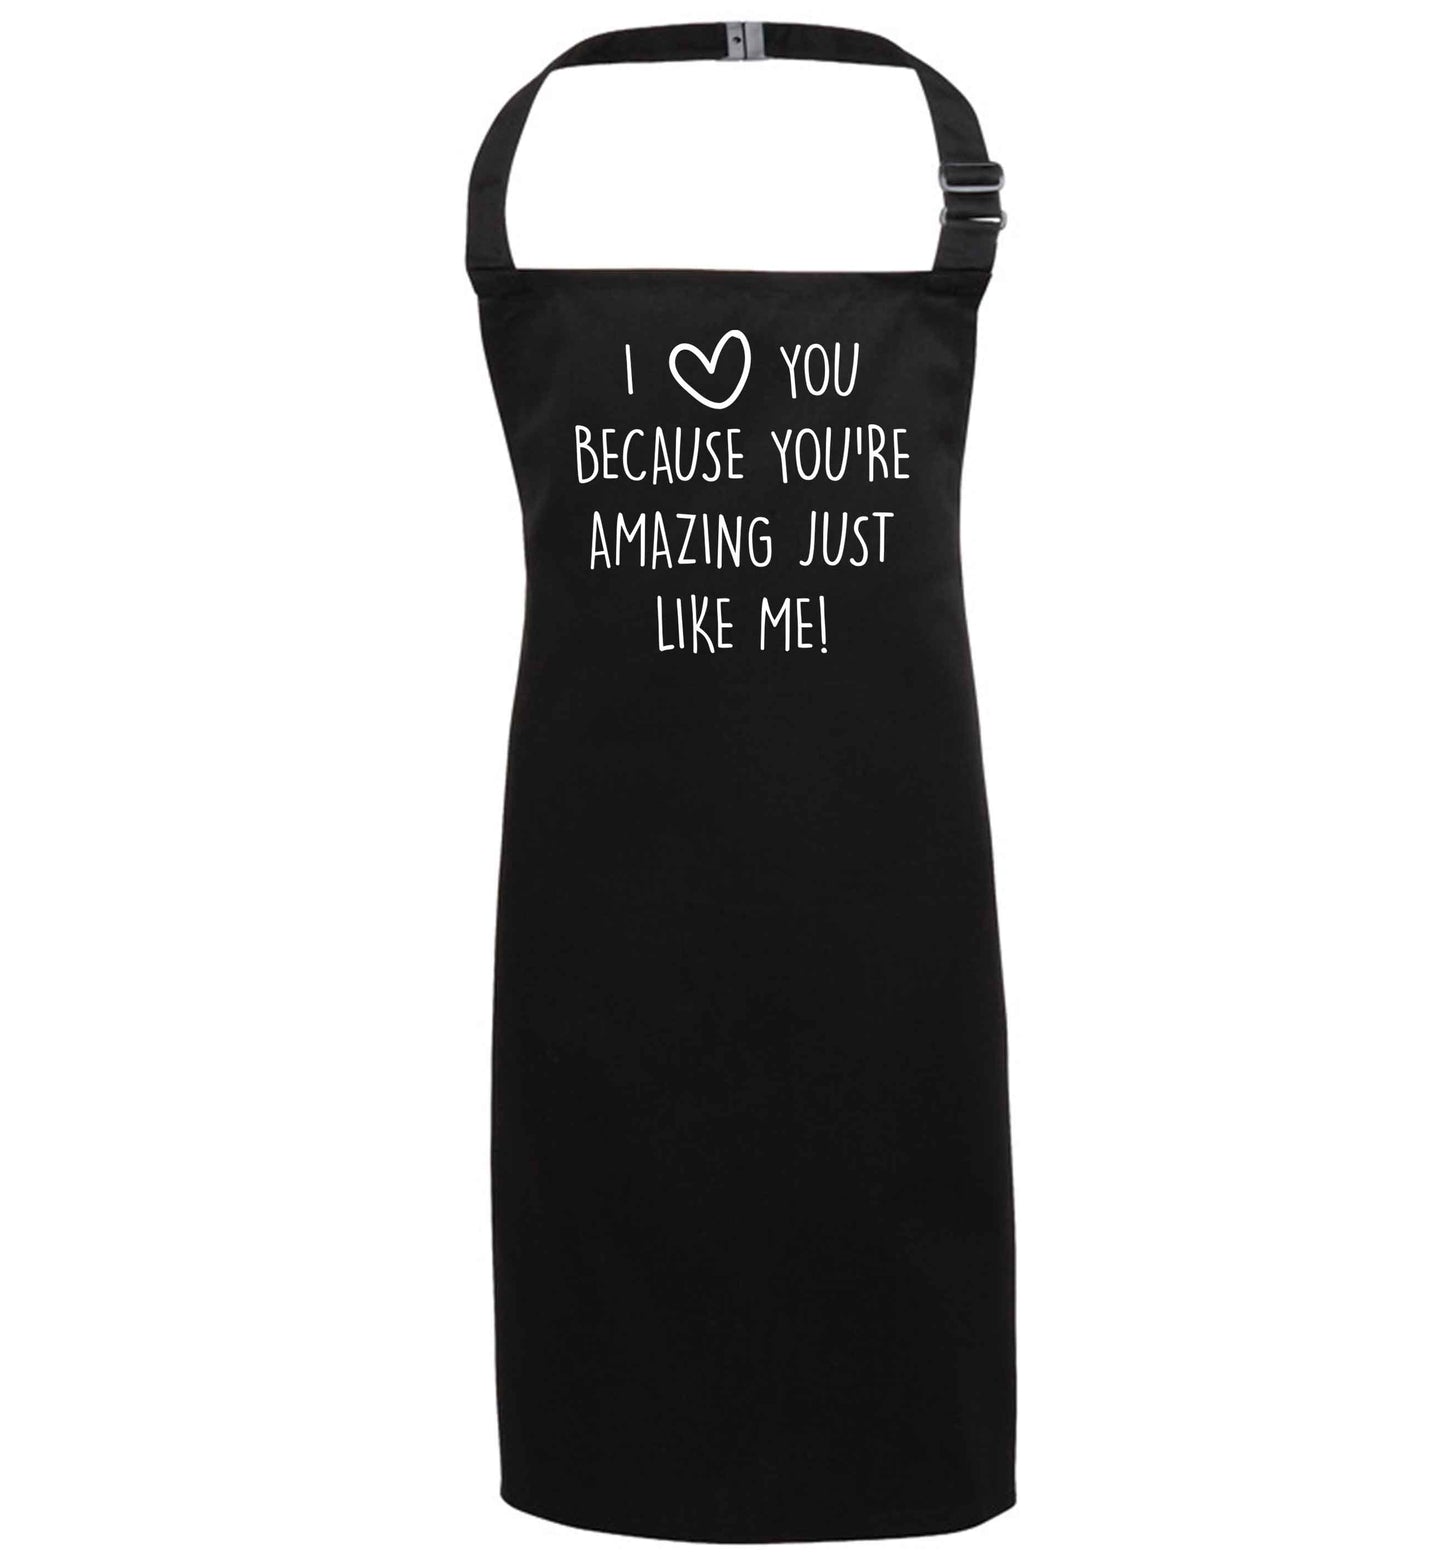 I love you because you're amazing just like me black apron 7-10 years